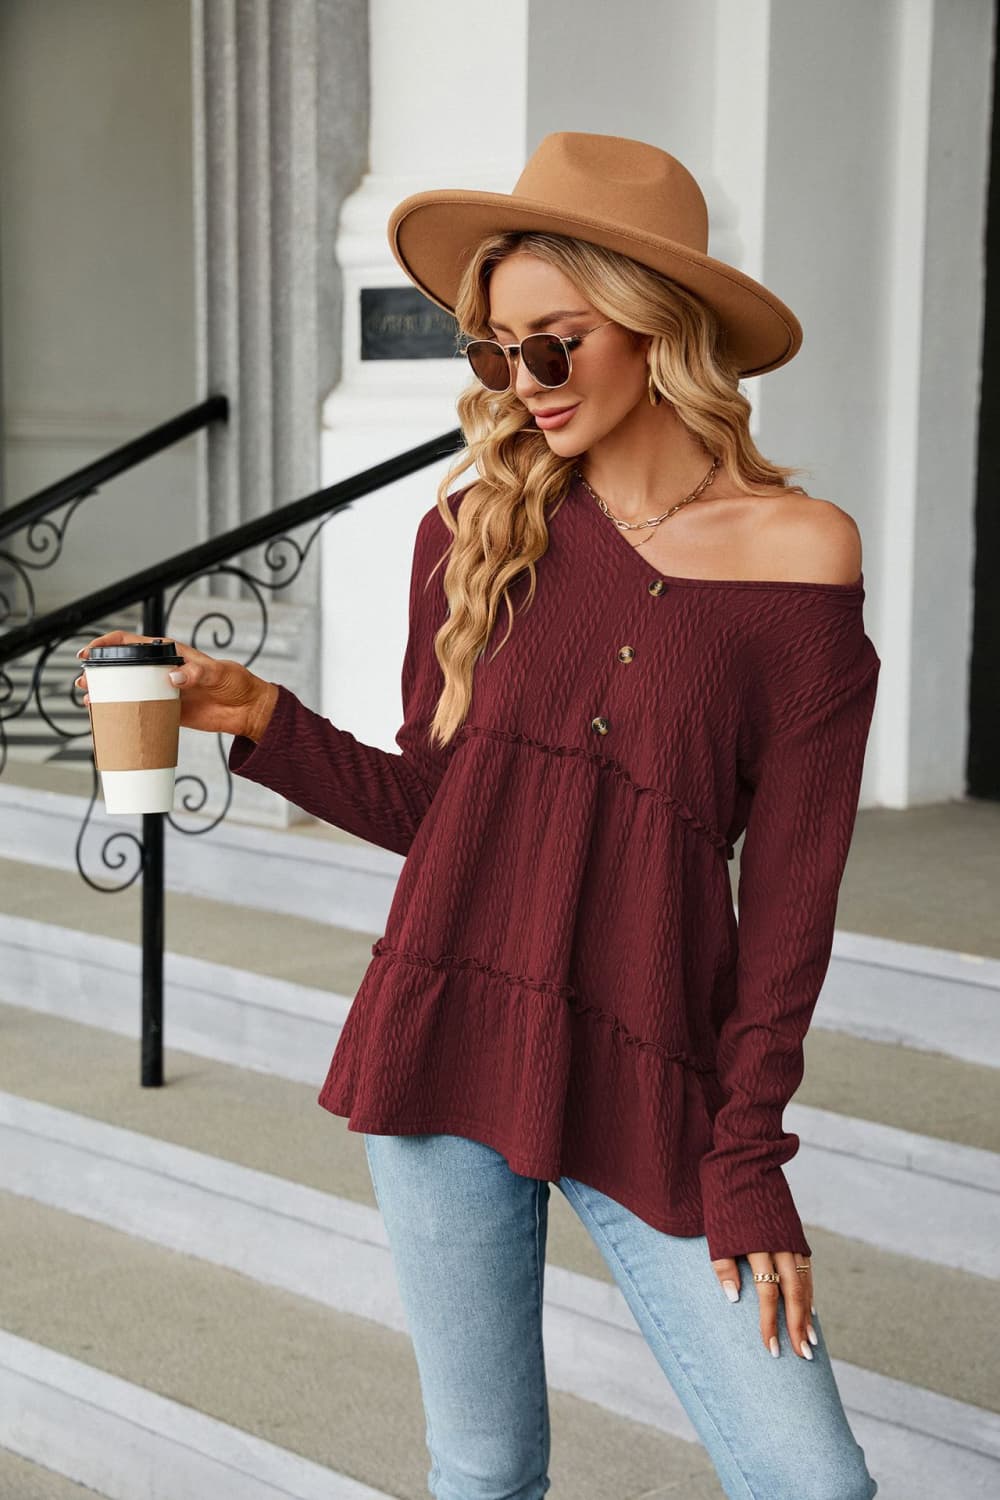 Long Sleeve V-Neck Cable-Knit Blouse - Women’s Clothing & Accessories - Shirts & Tops - 17 - 2024